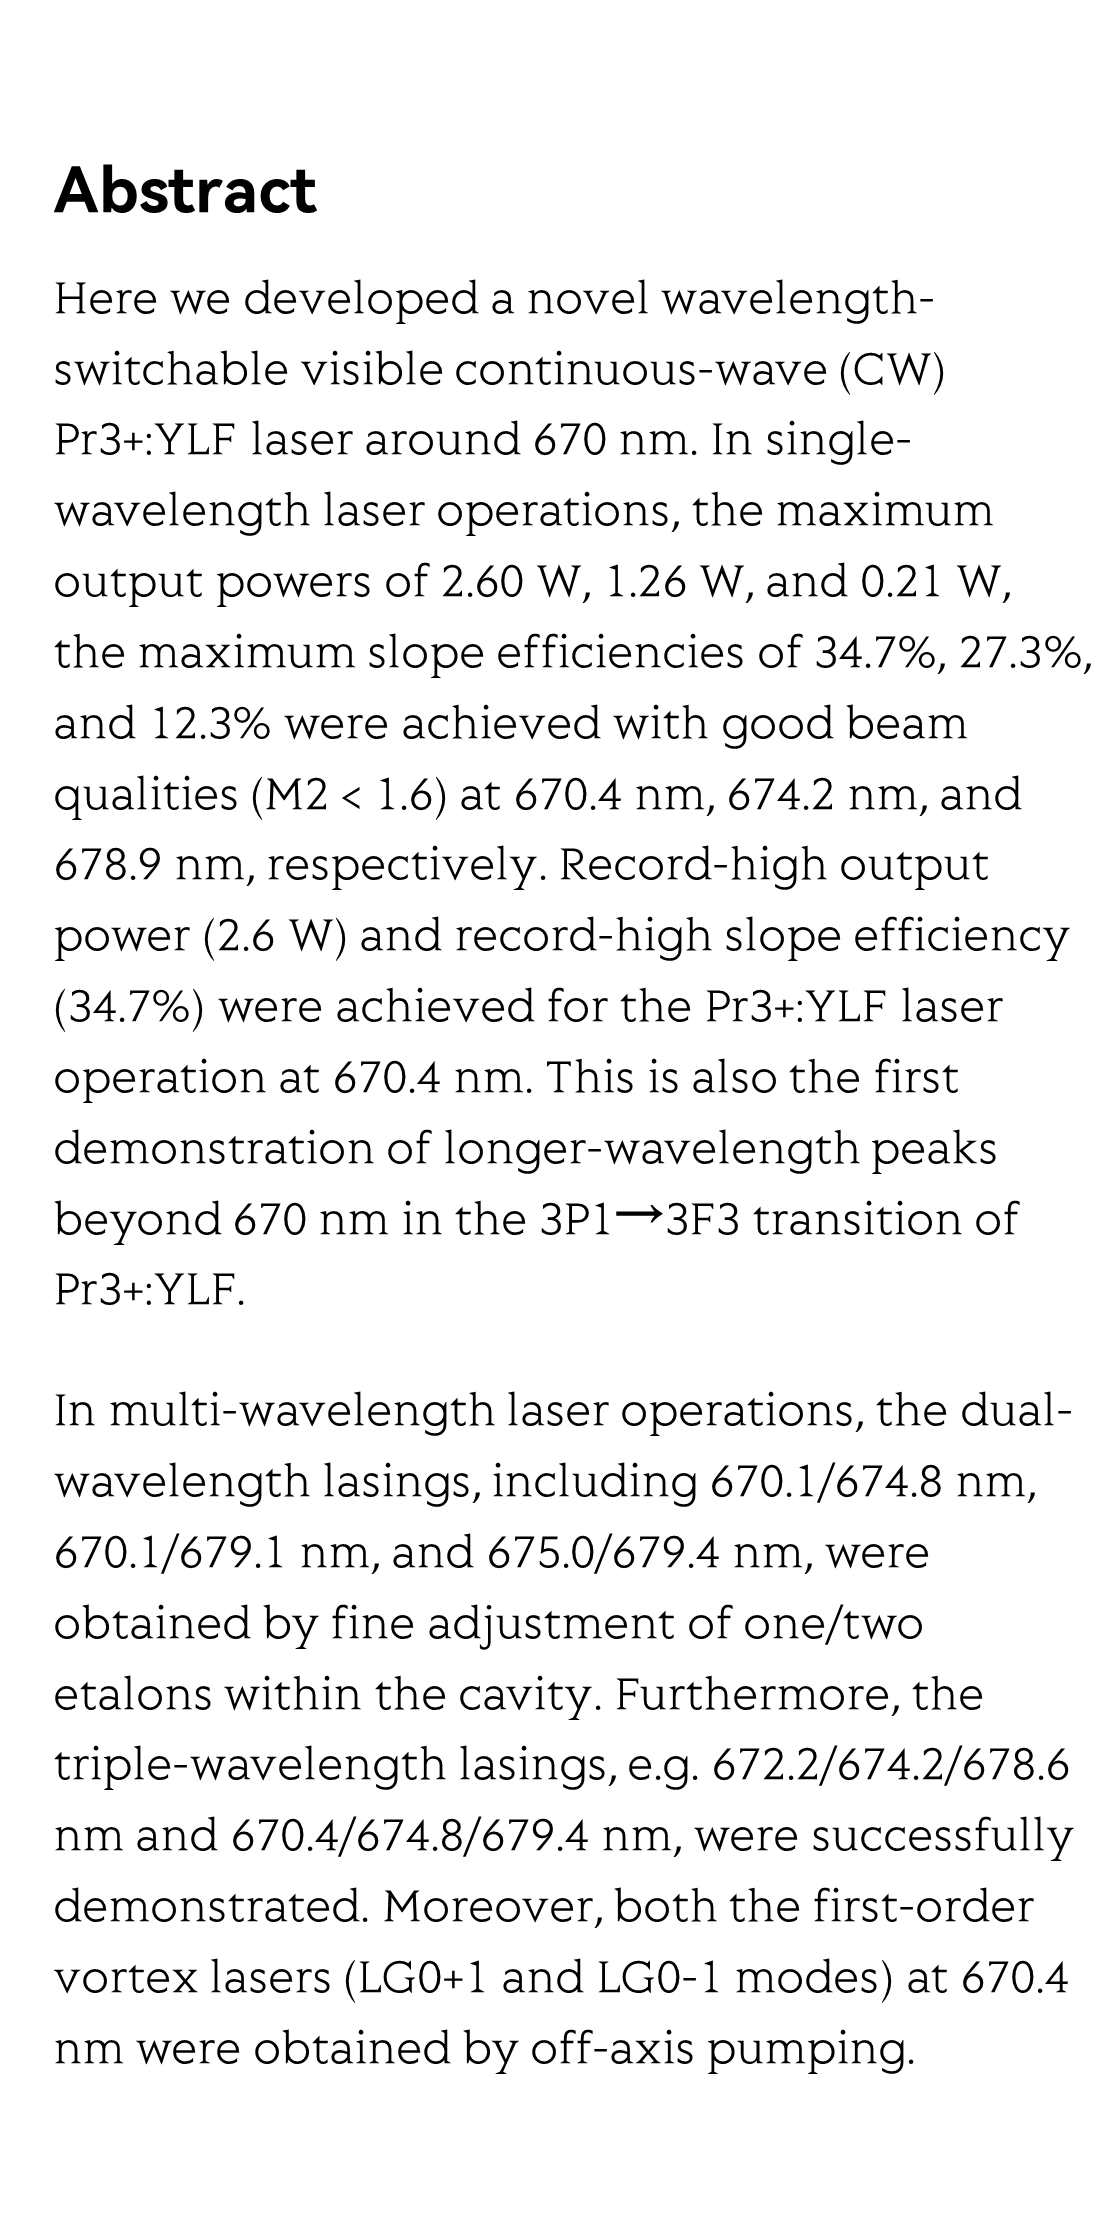 Diode-pumped wavelength-switchable visible Pr3+:YLF laser and vortex laser around 670 nm_2